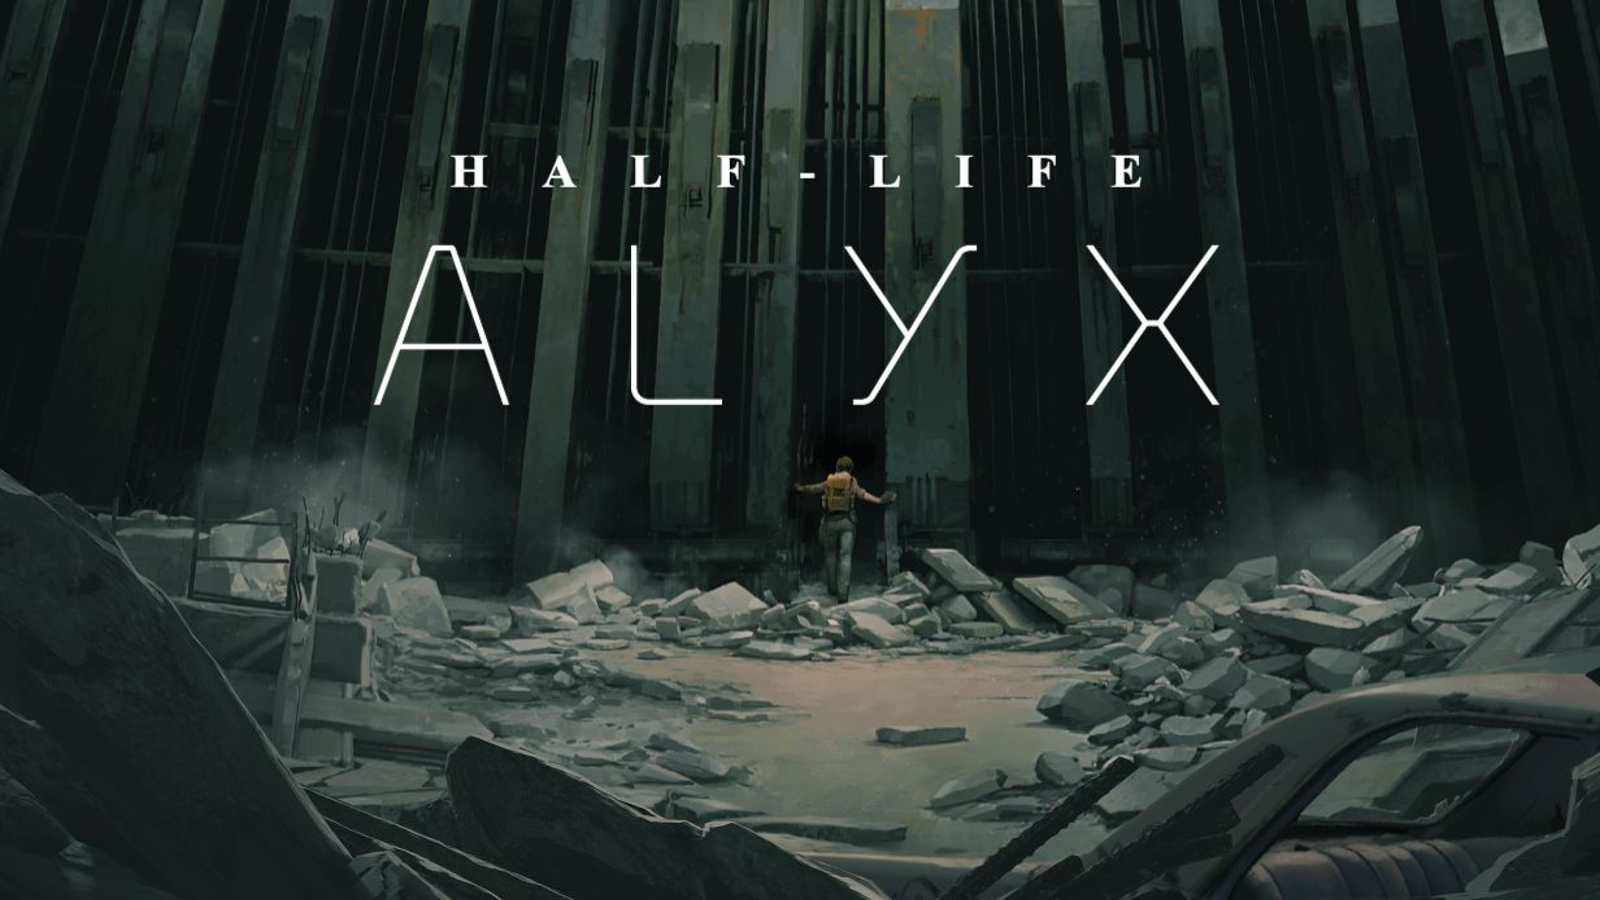 Here's a look at Half-Life: Alyx being played without VR